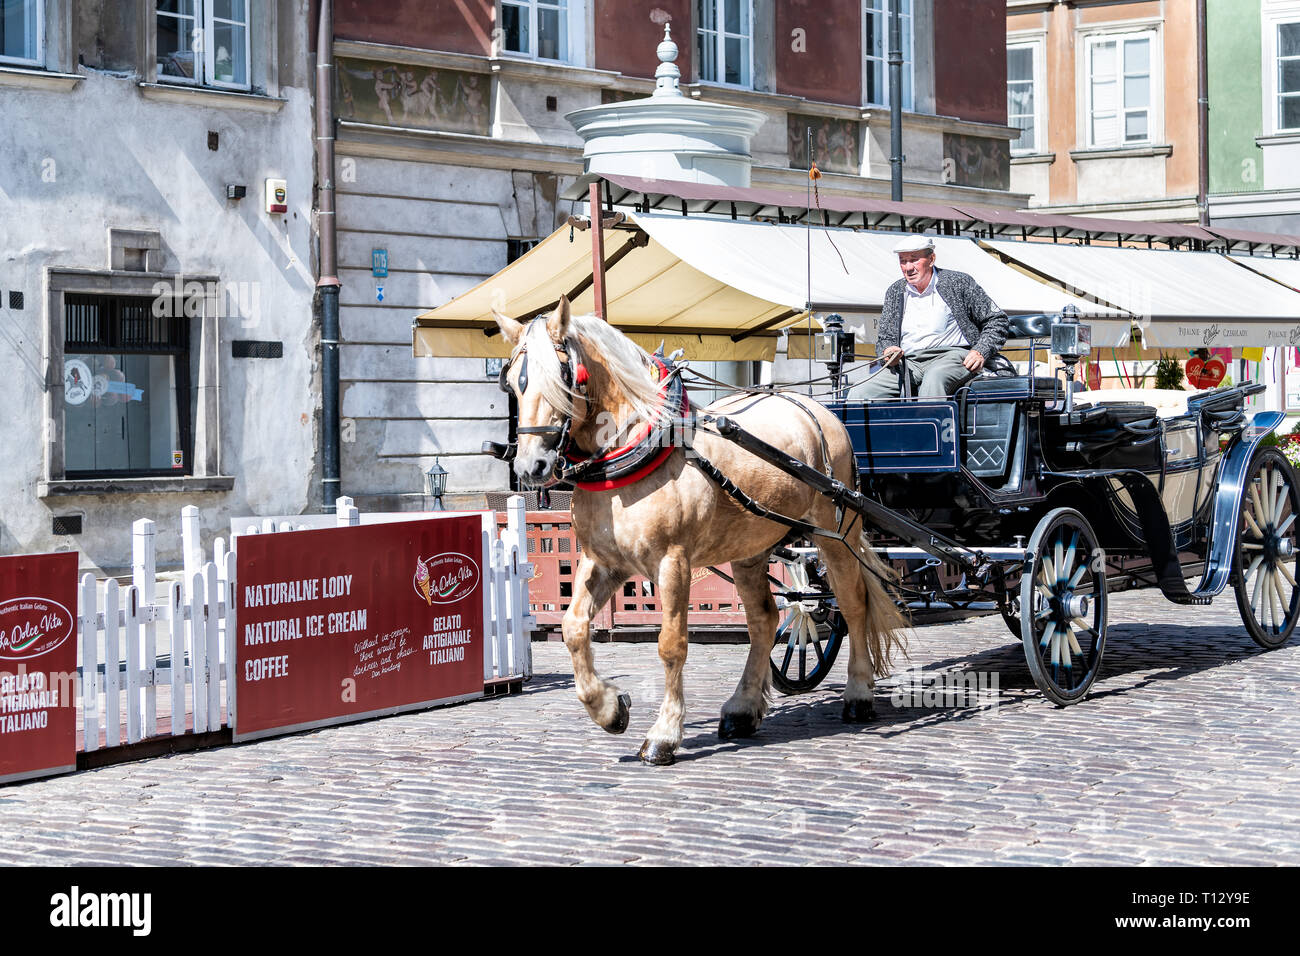 Warsaw, Poland - August 22, 2018: Historic buildings and horse carriage tour in old town during day and guide man Stock Photo